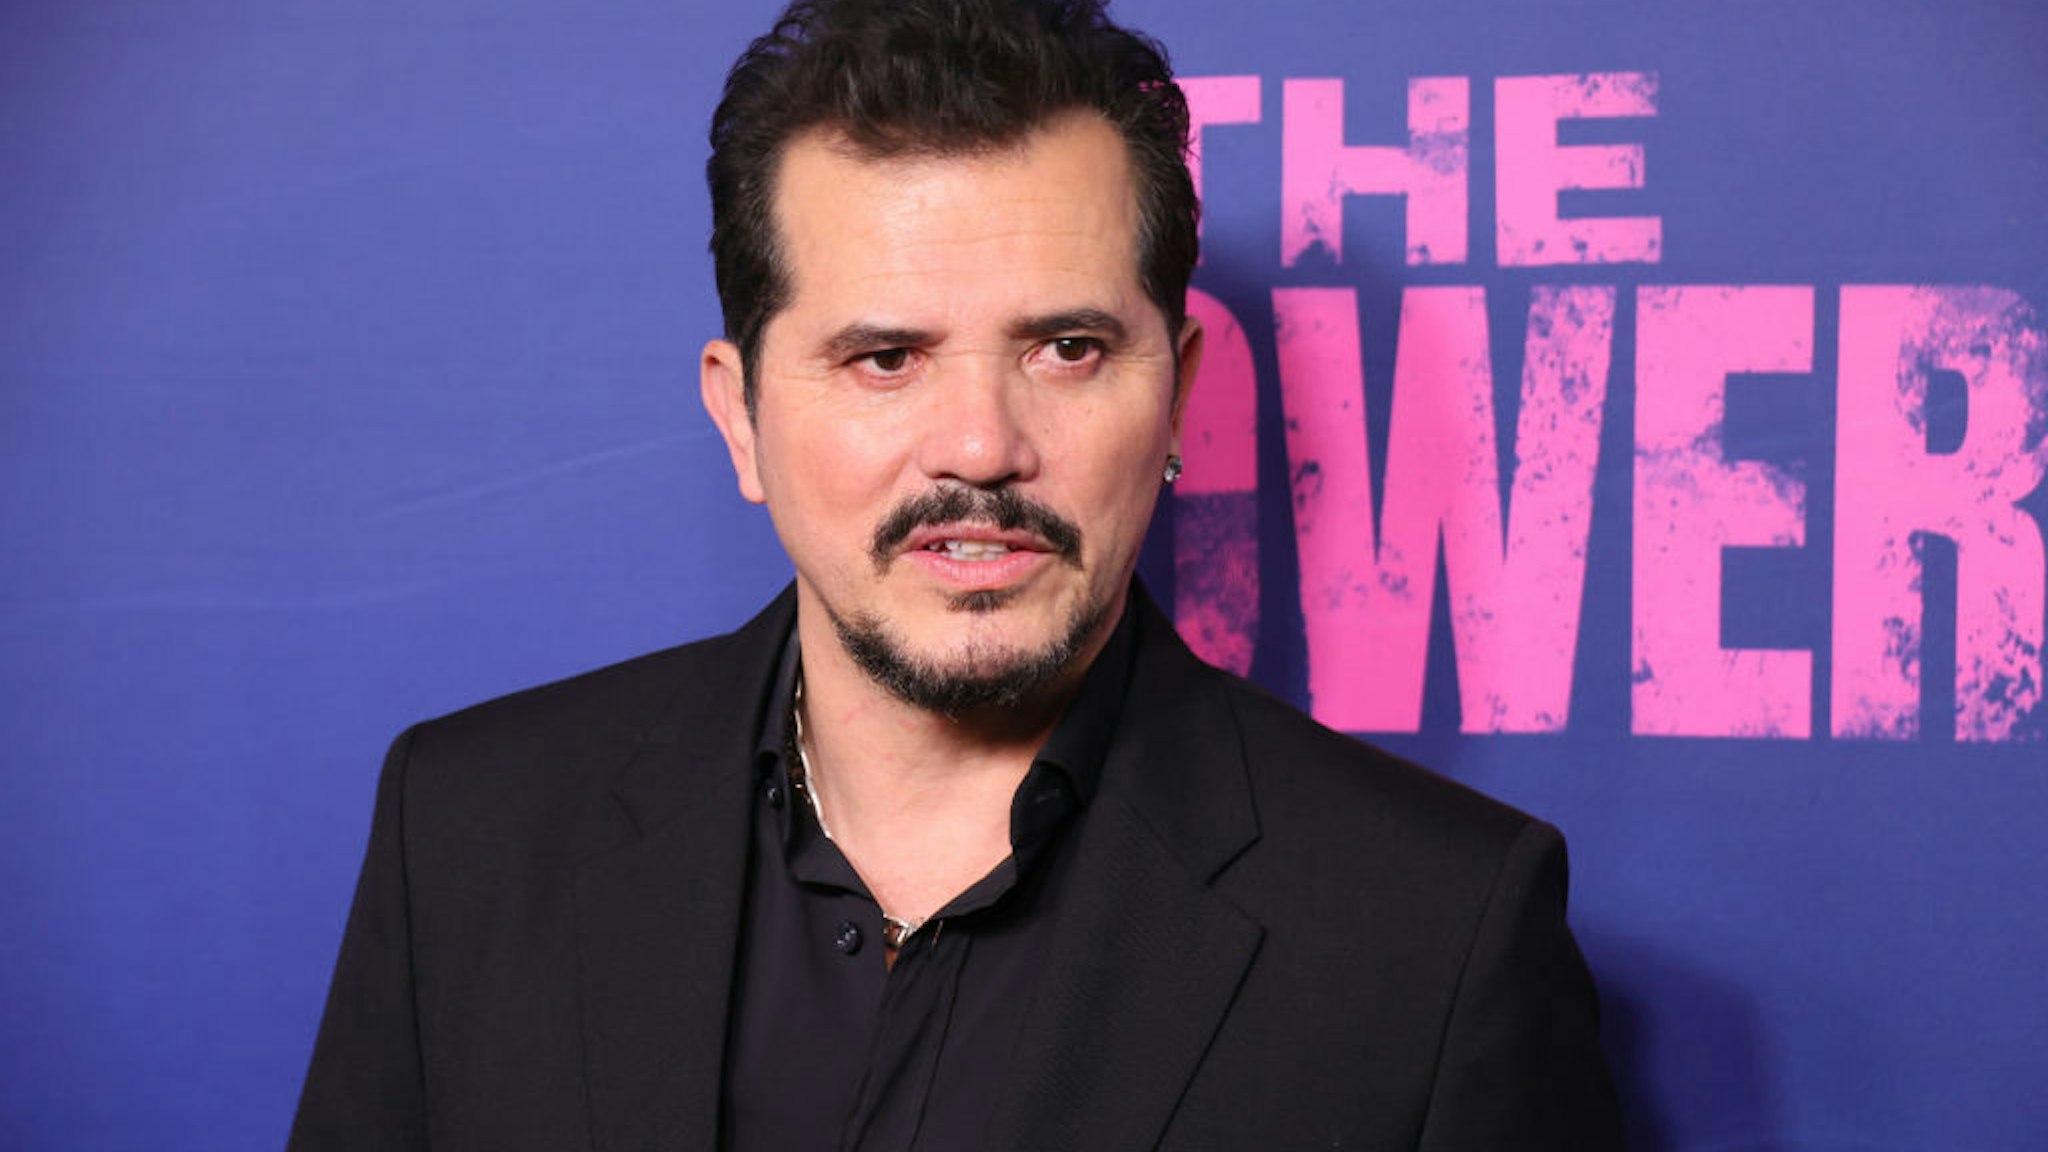 John Leguizamo attends the premiere of Prime Video's "The Power" at DGA Theater on March 23, 2023 in New York City.